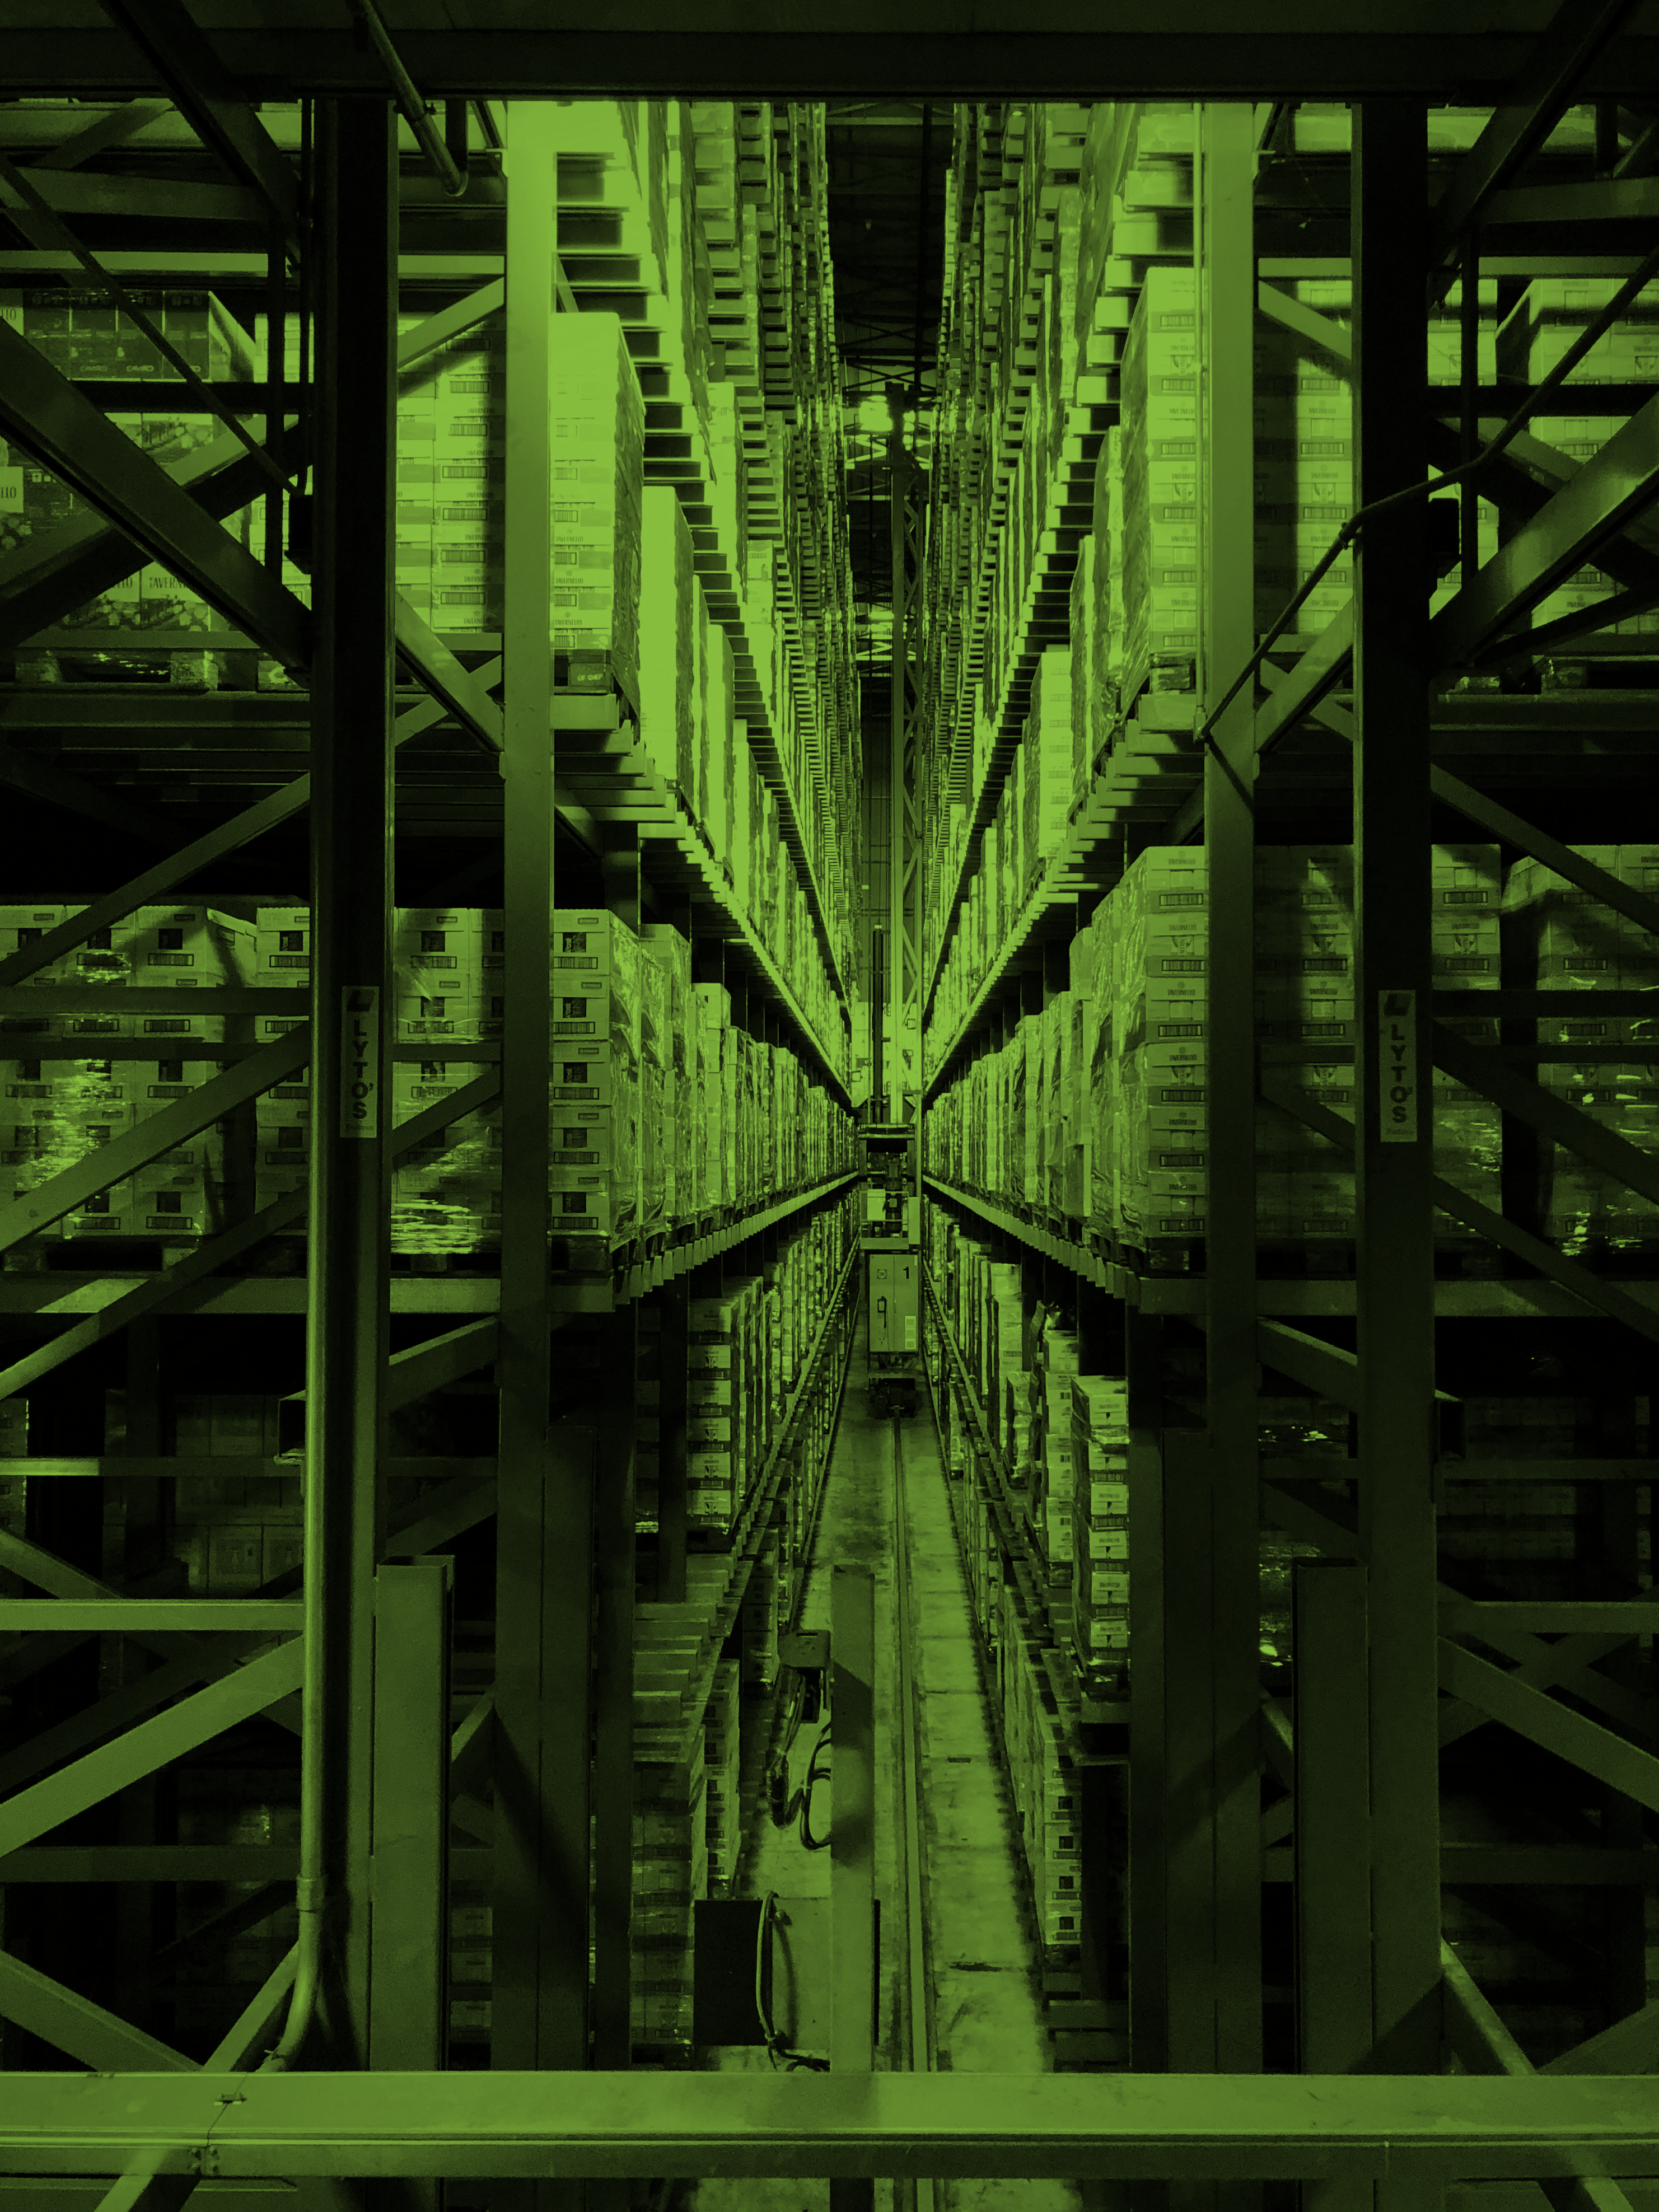 Warehouse of pallets